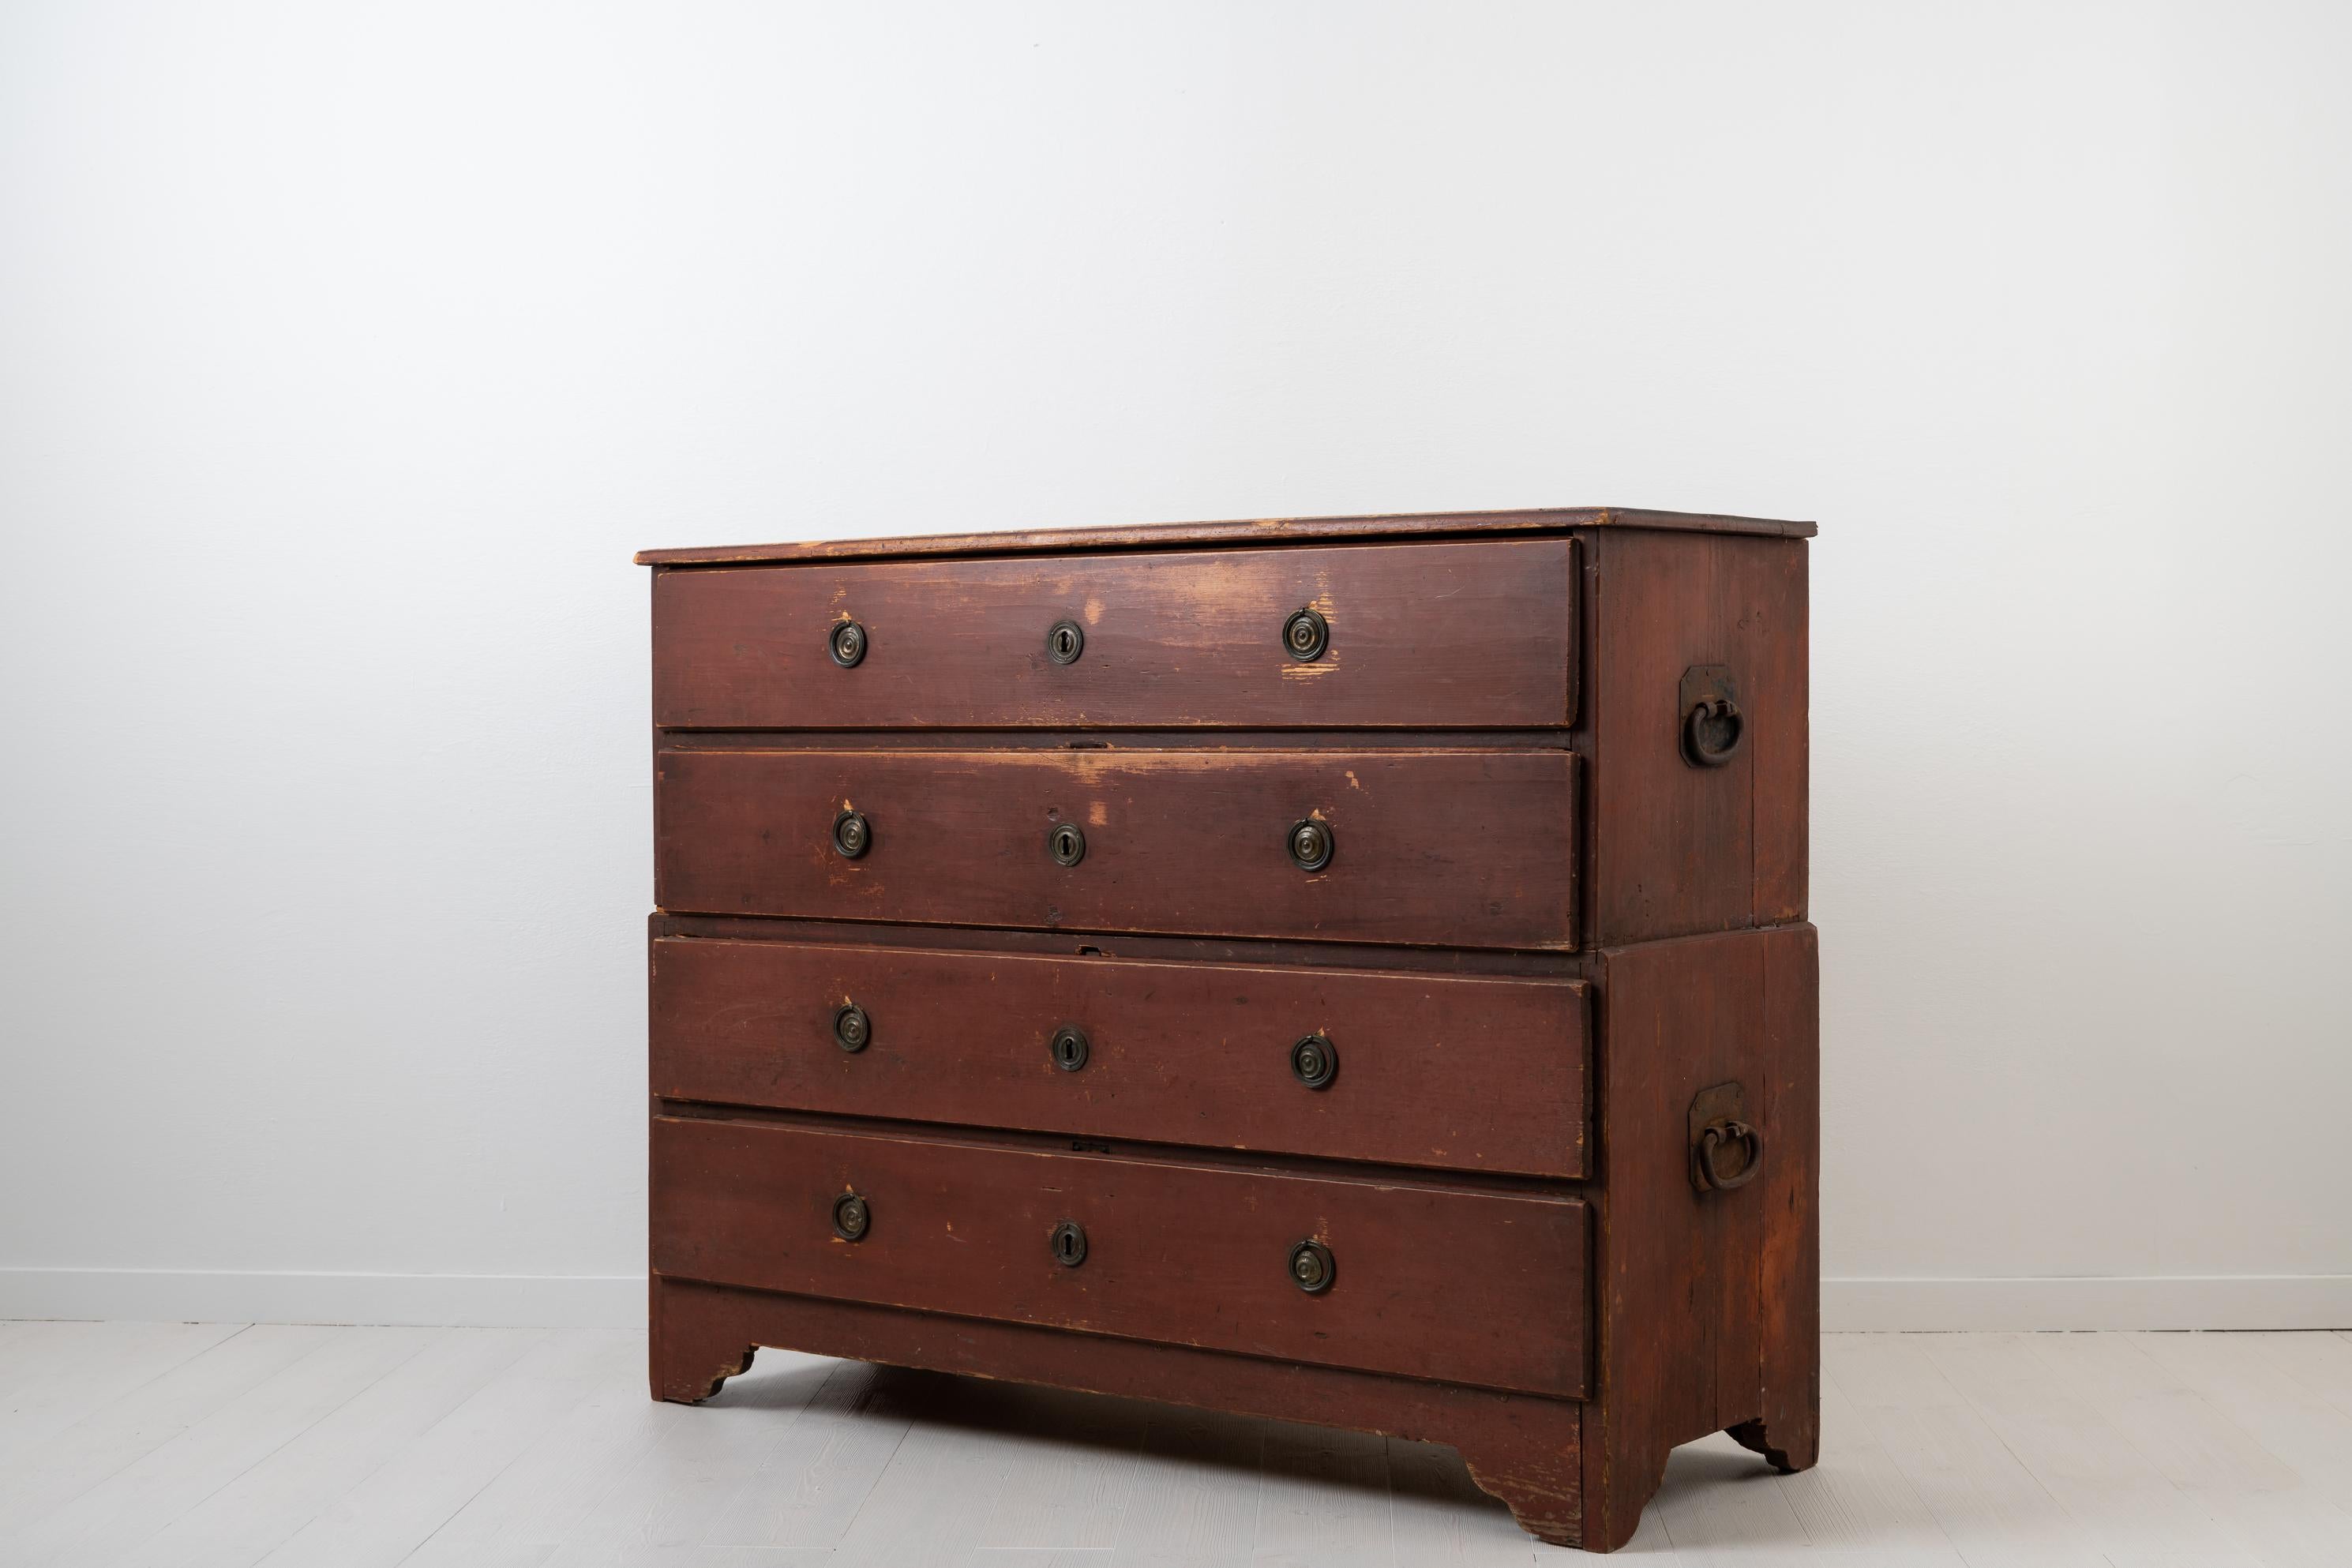 Late 1700s Swedish Neoclassical Chest of Drawers In Good Condition For Sale In Kramfors, SE